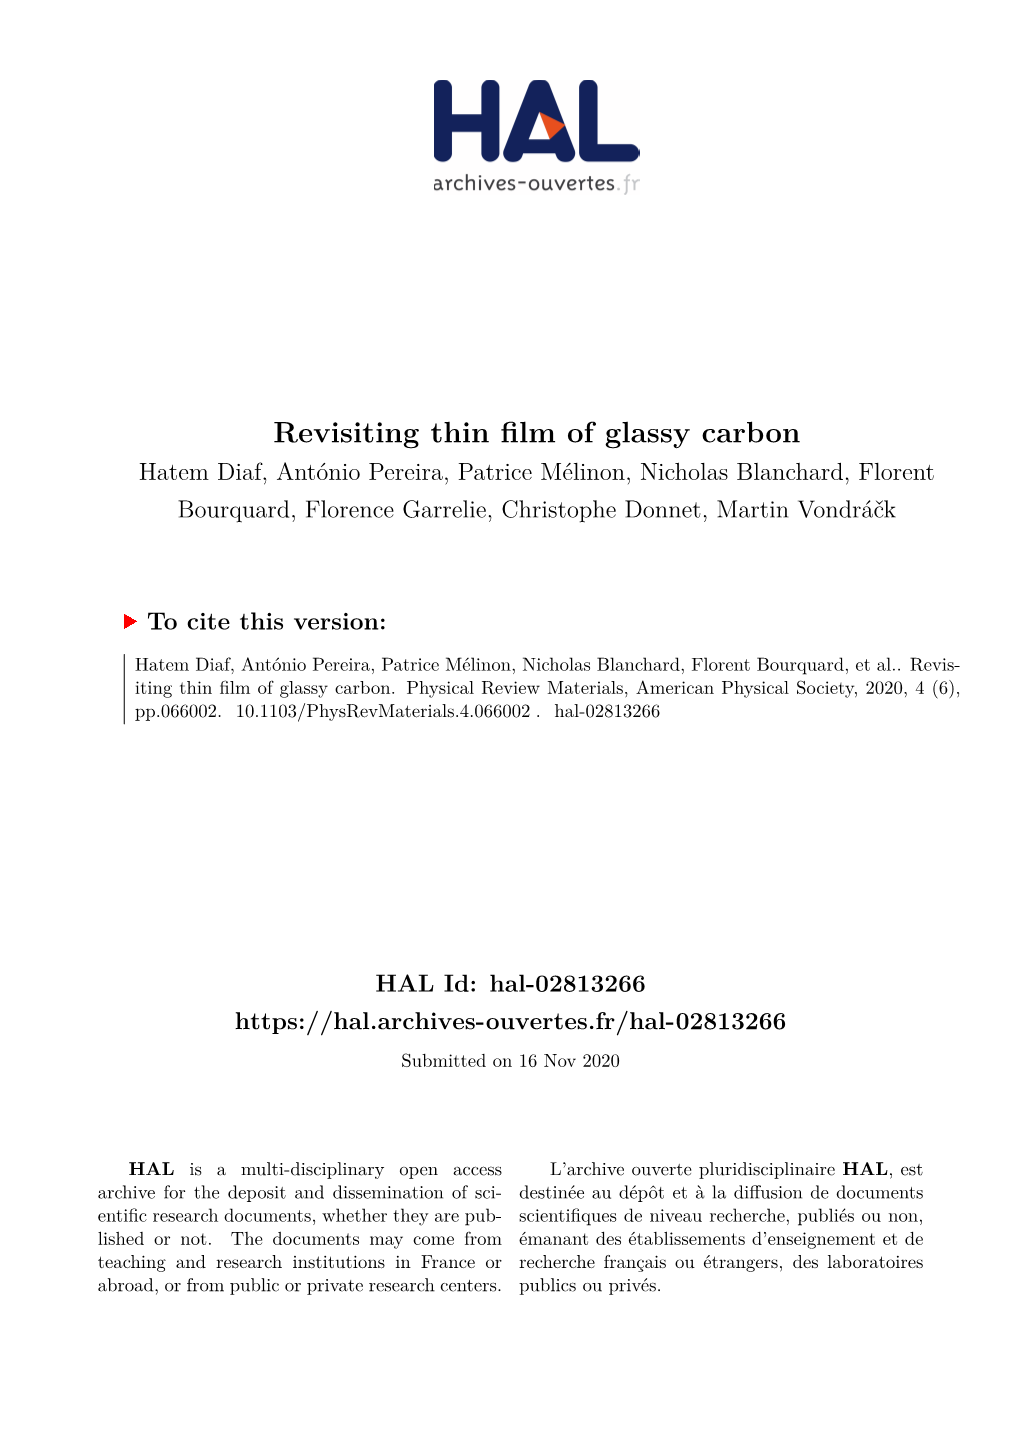 Revisiting Thin Film of Glassy Carbon